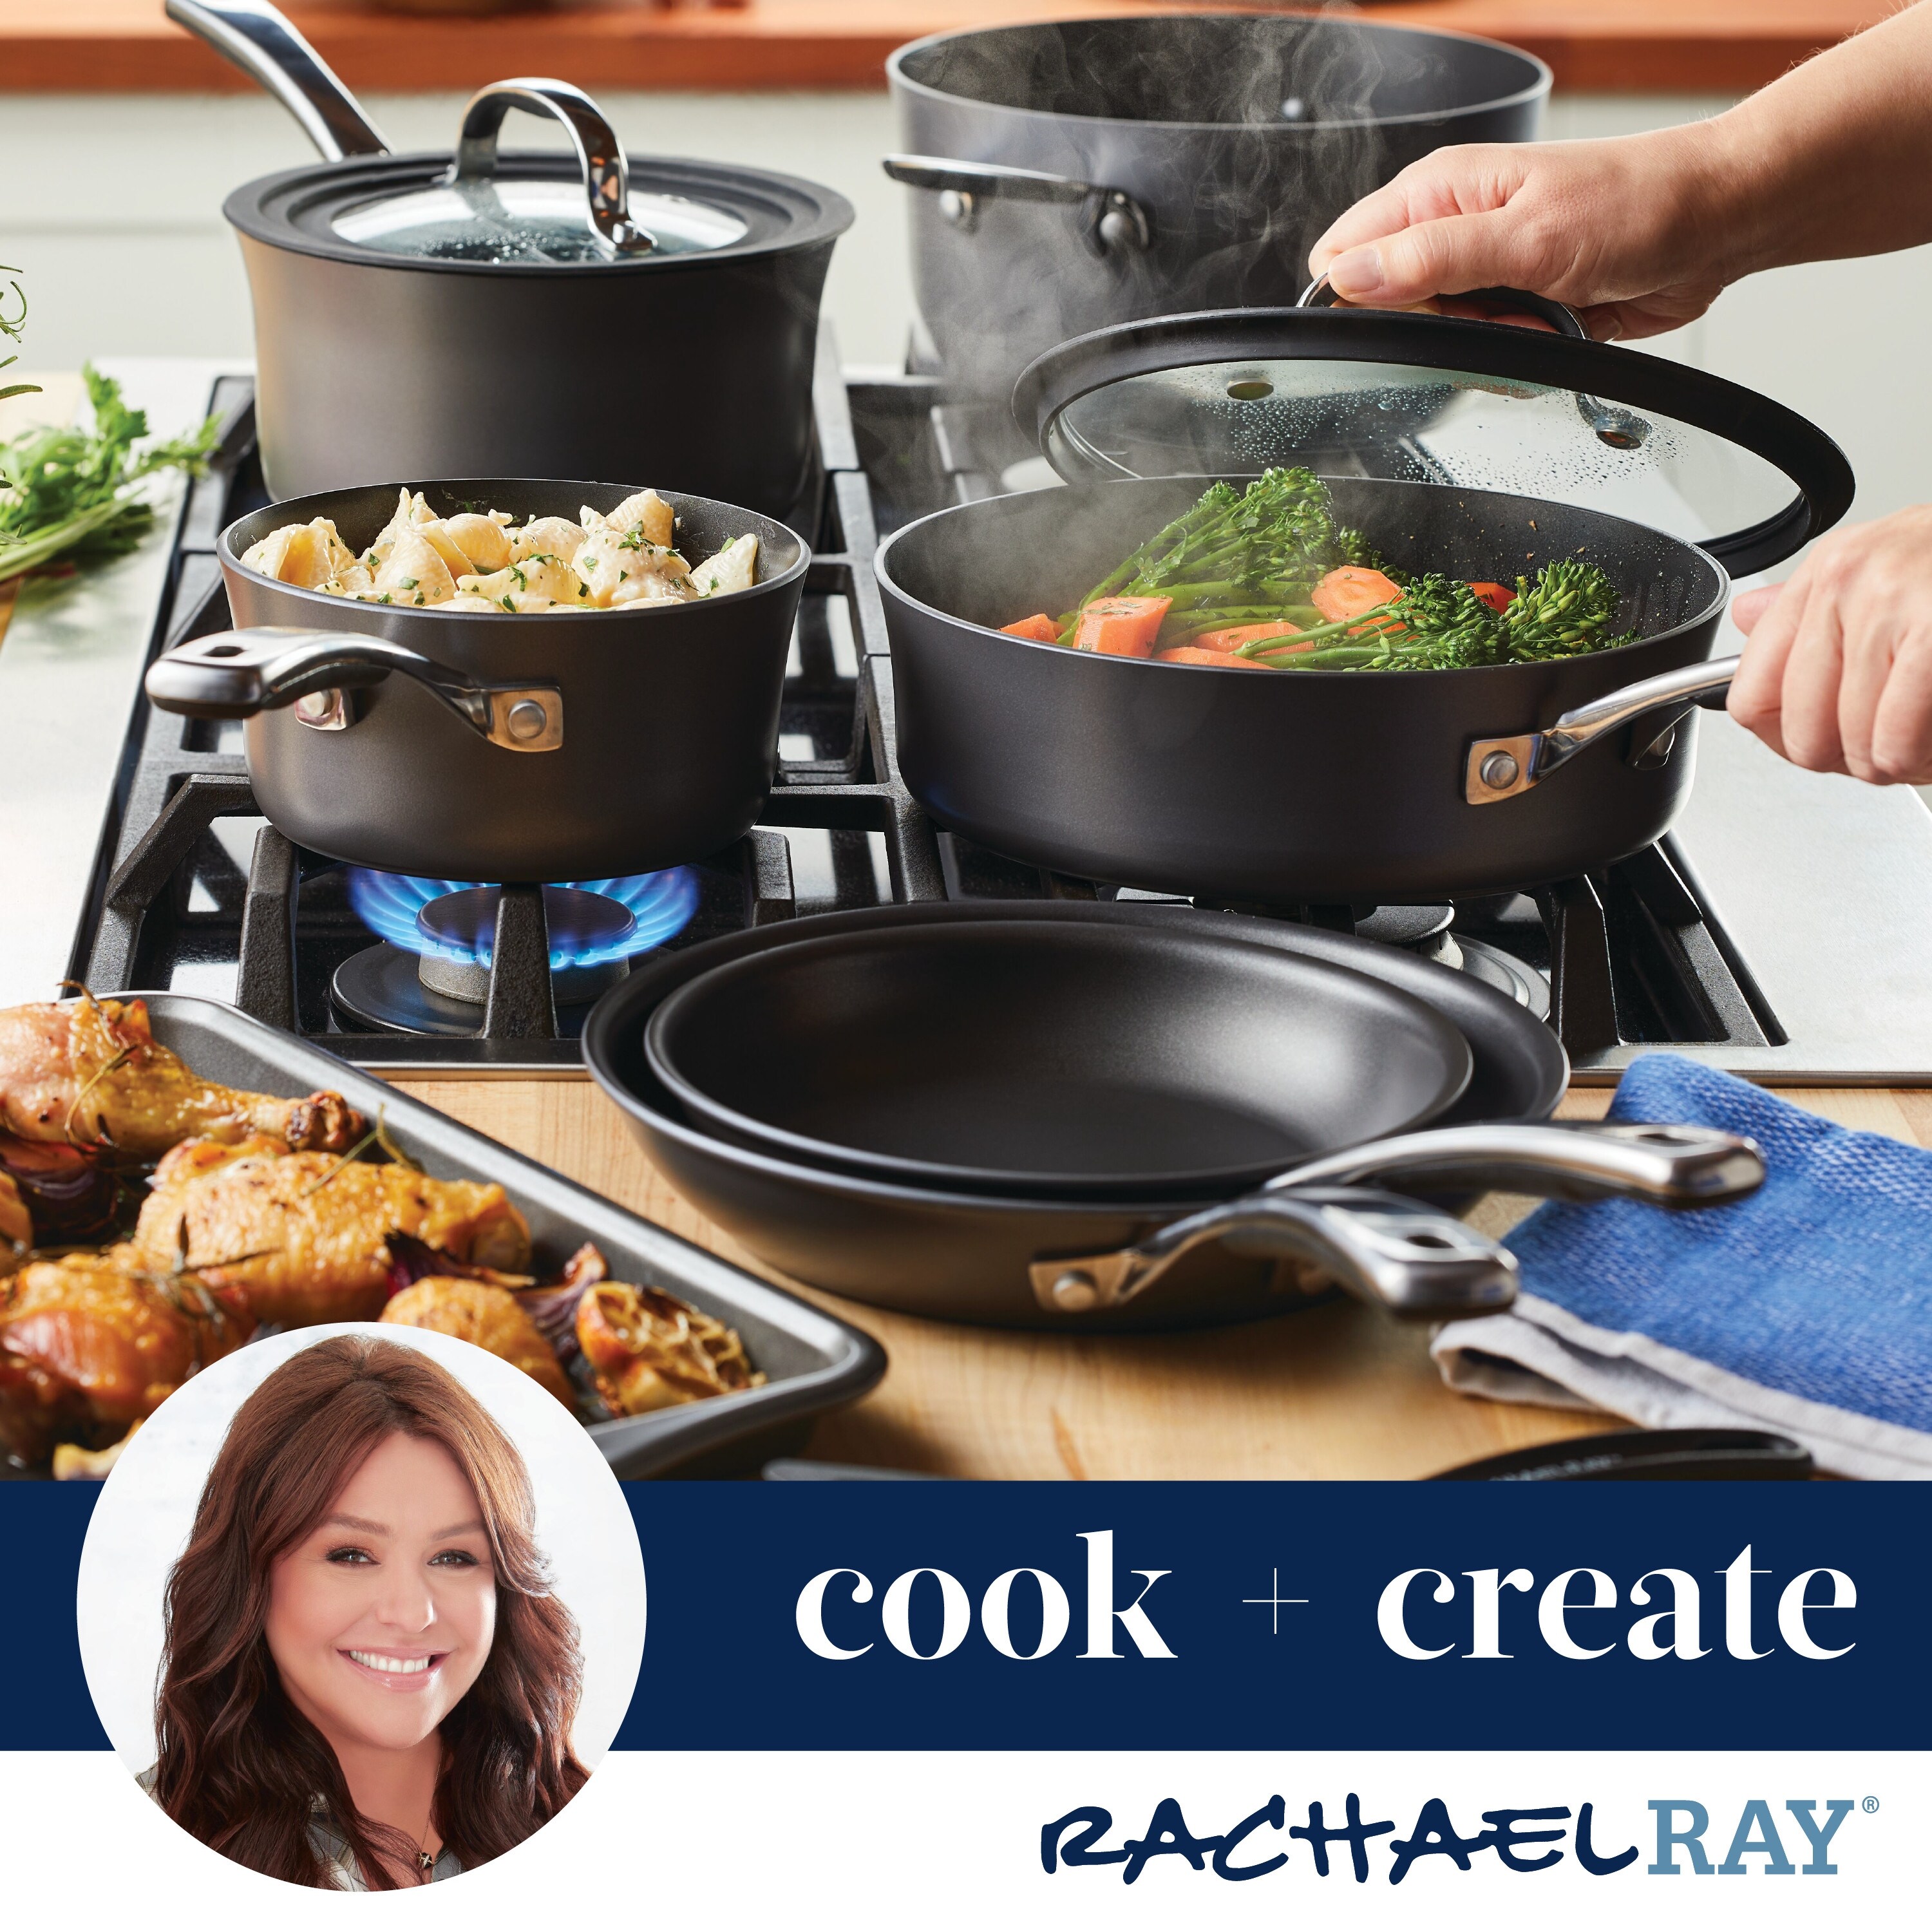 https://ak1.ostkcdn.com/images/products/is/images/direct/52b34a11ab0998b9e614e2a06f7098006e3c5d51/Rachael-Ray-Cook-%2B-Create-Hard-Anodized-Nonstick-Cookware-Pots-and-Pans-Set%2C-10-Piece%2C-Black.jpg